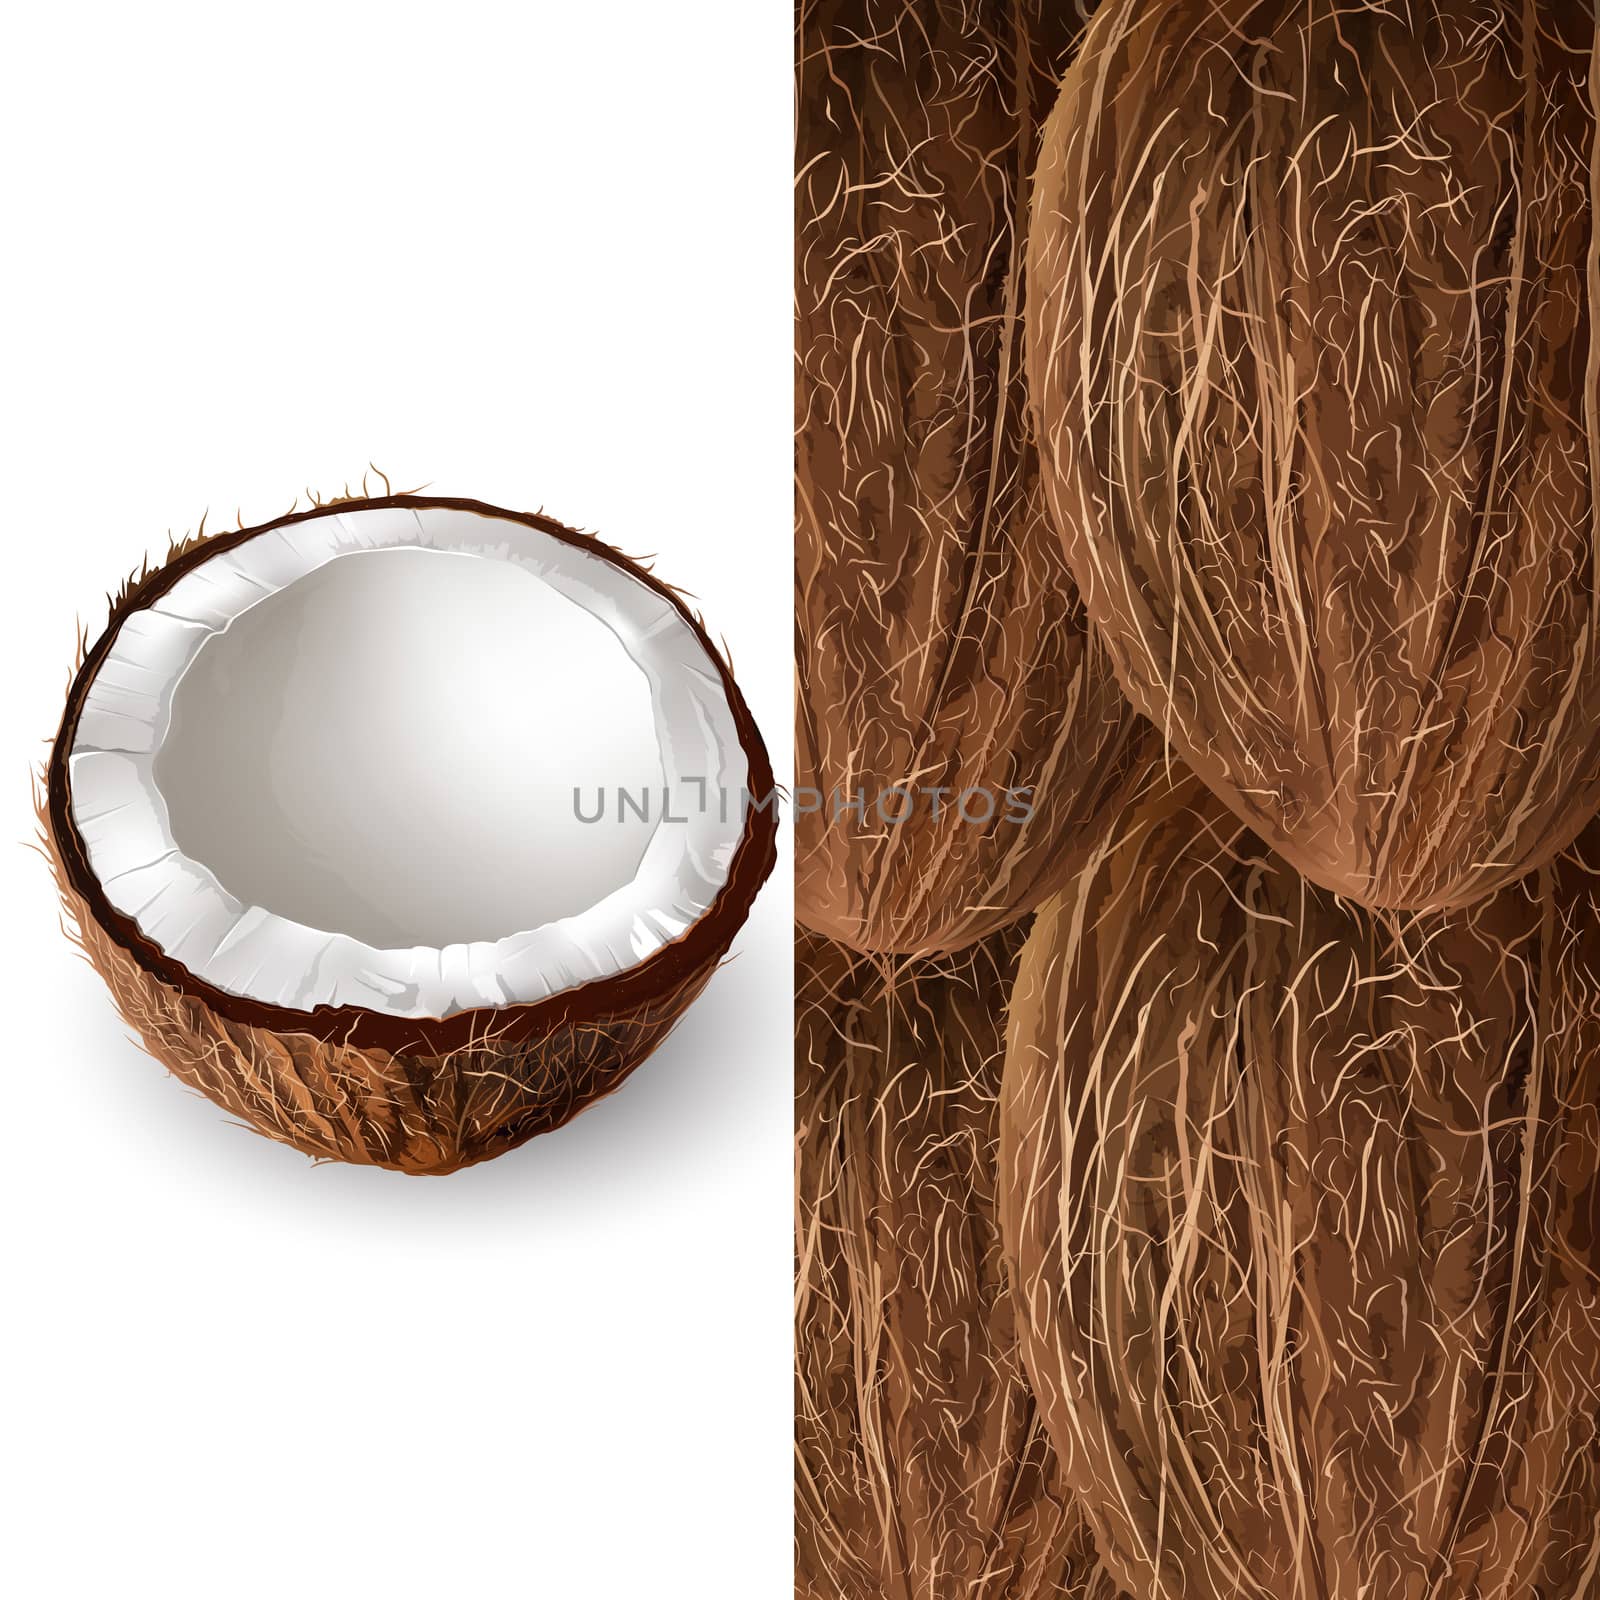 Coconut on a brown and white background.